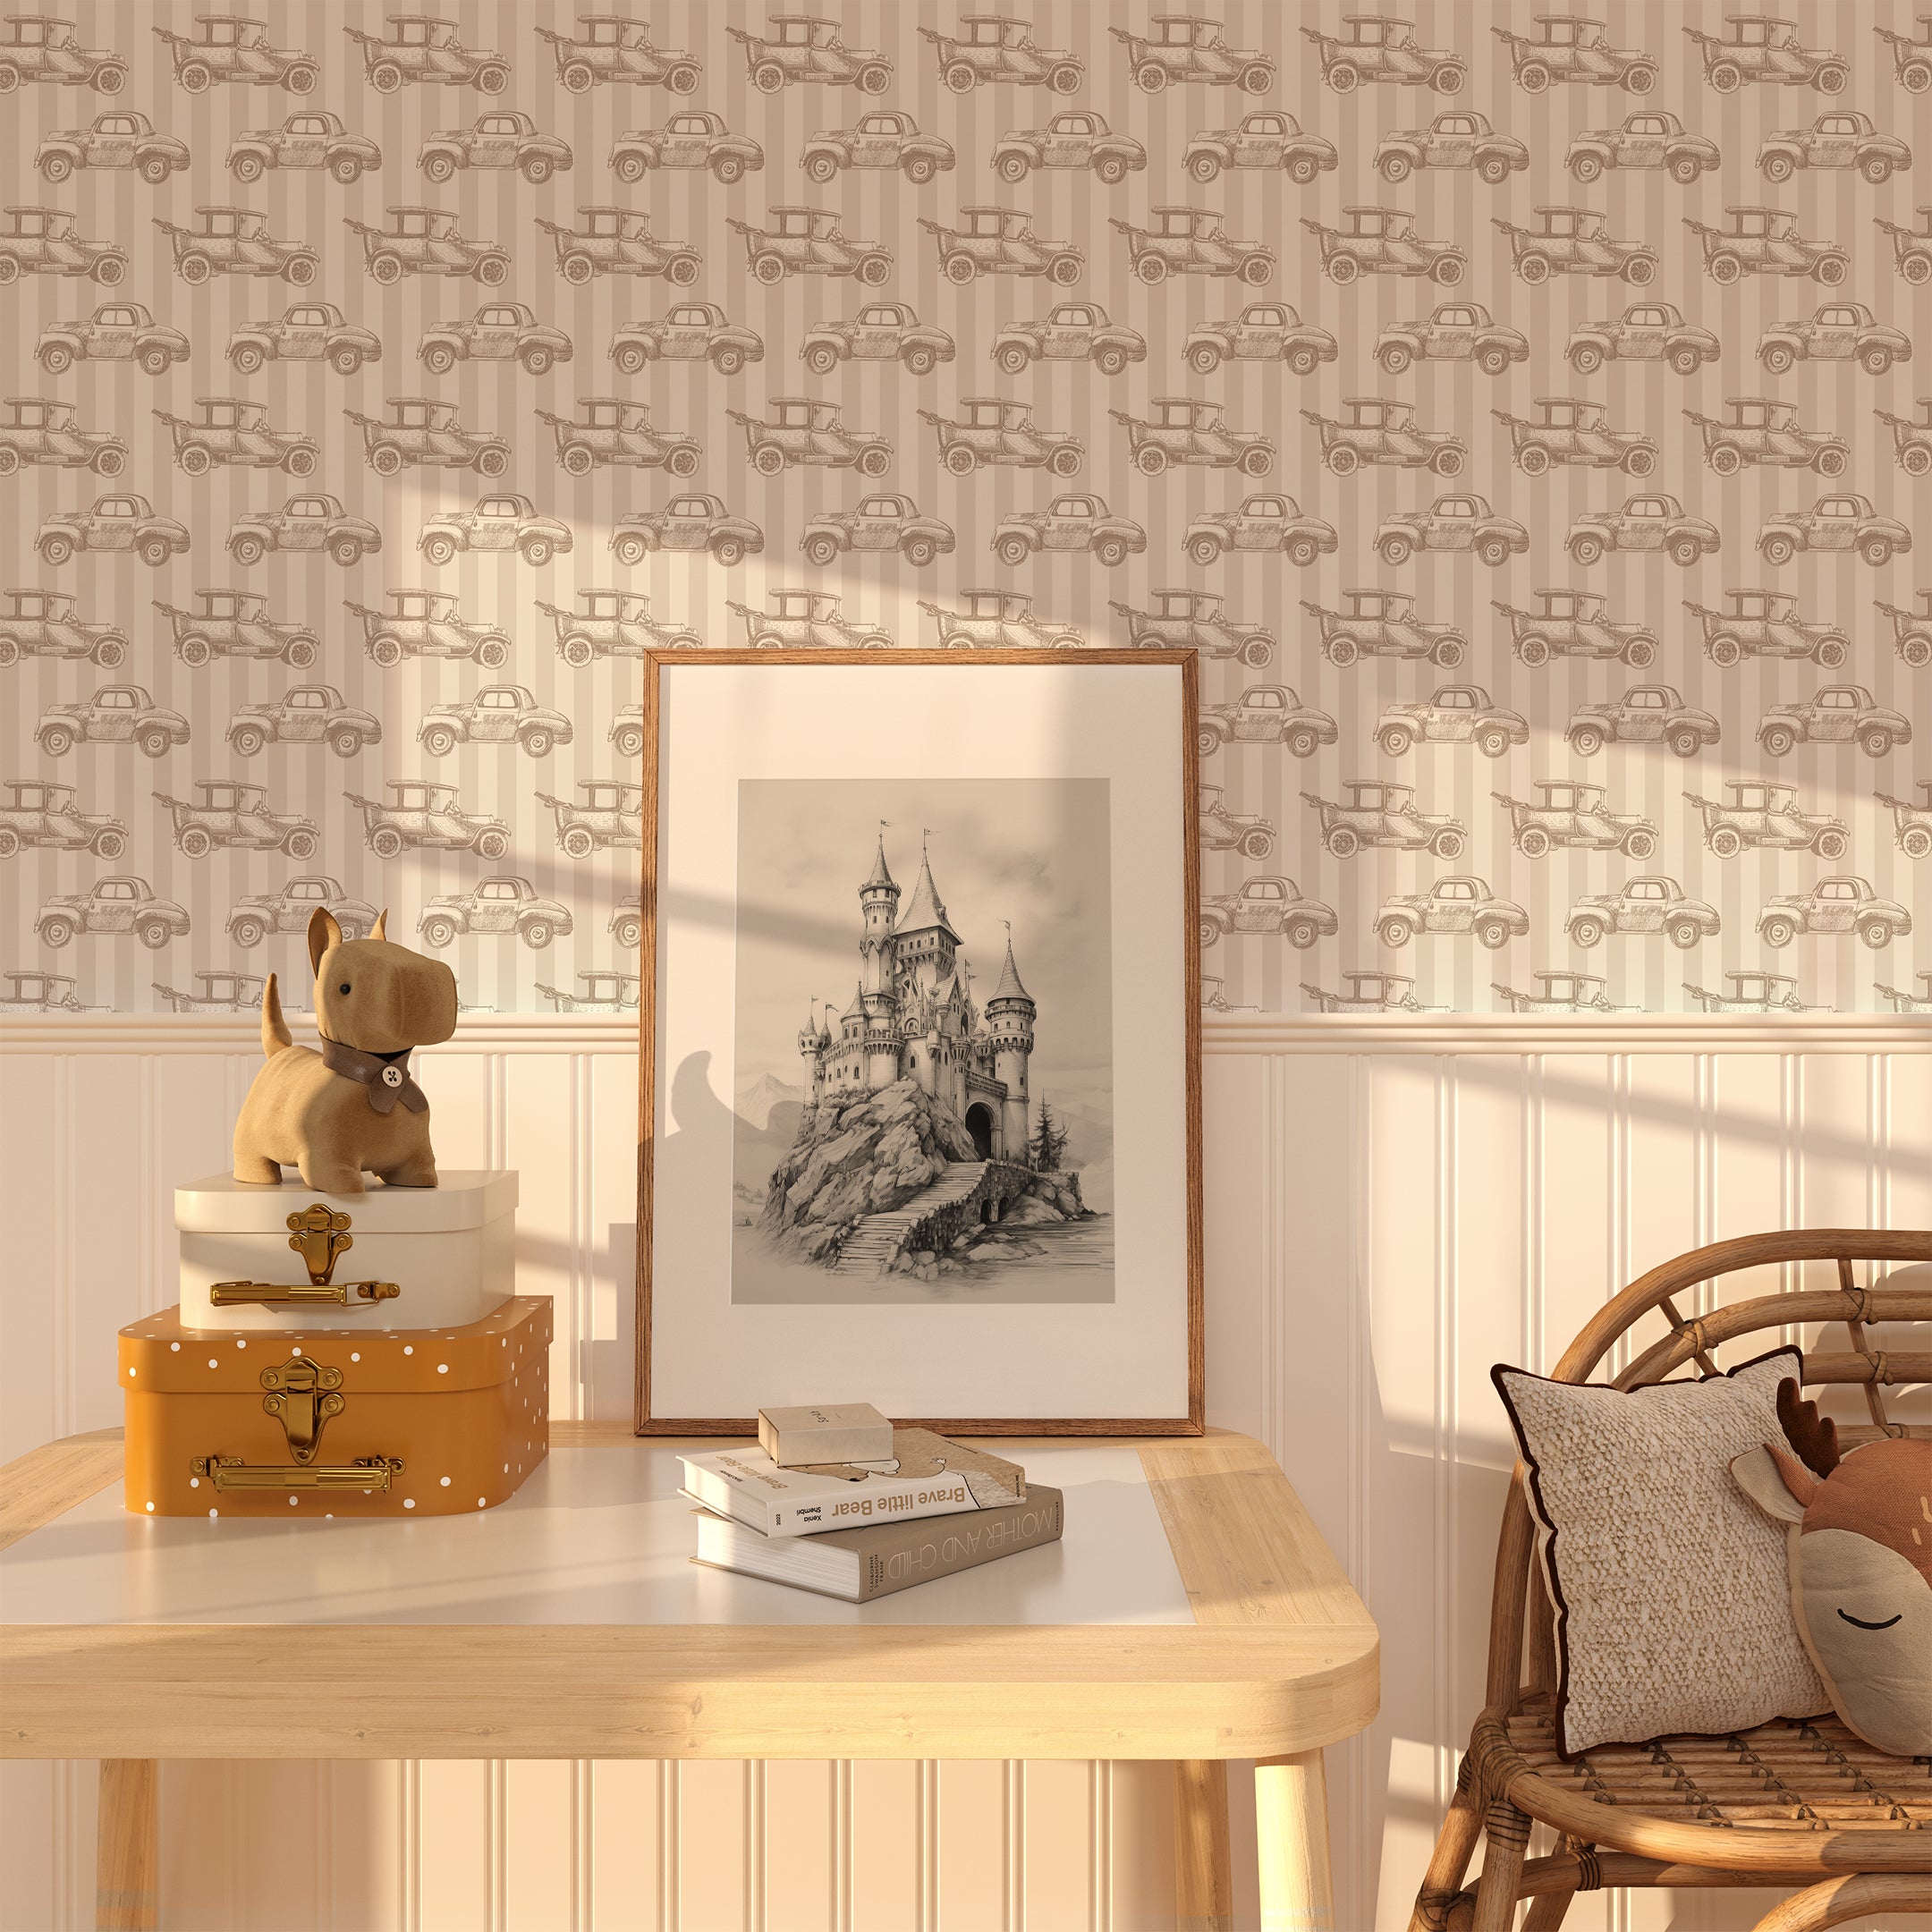 A charming room featuring the Antique Auto Wallpaper in beige. The wallpaper displays vintage car illustrations in a repeating pattern. The room includes a wooden table with stacked suitcases, a plush dog toy, and a framed sketch of a castle.